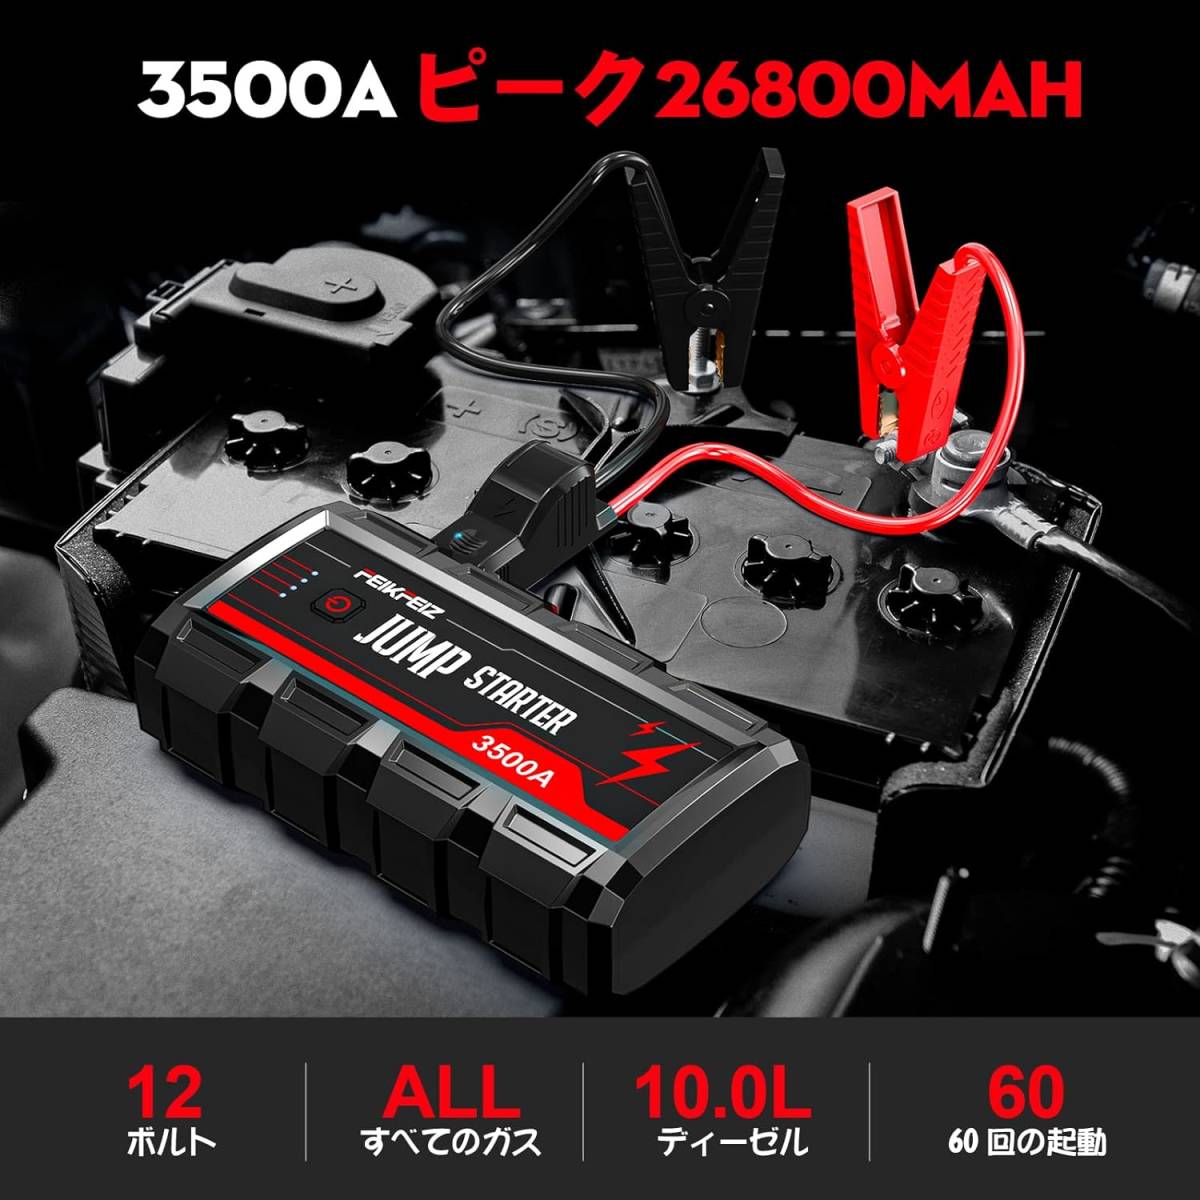  new goods unused / same day shipping / Jump starter * engine starter / 12V car / high capacity 26800mAh /pi-k electric current 3500A